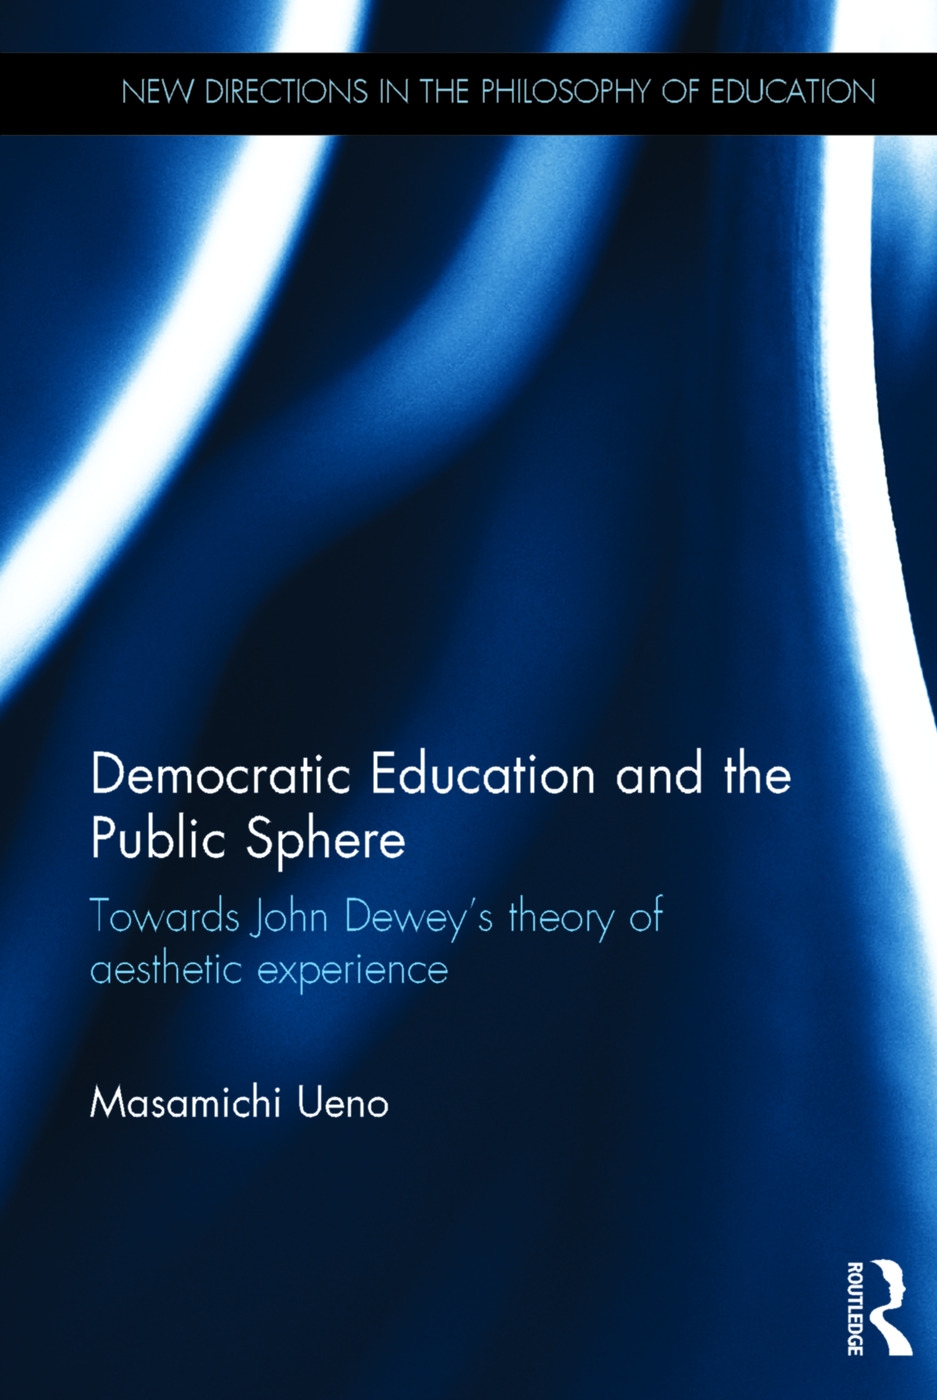 Democratic Education and the Public Sphere: Towards John Dewey’s Theory of Aesthetic Experience